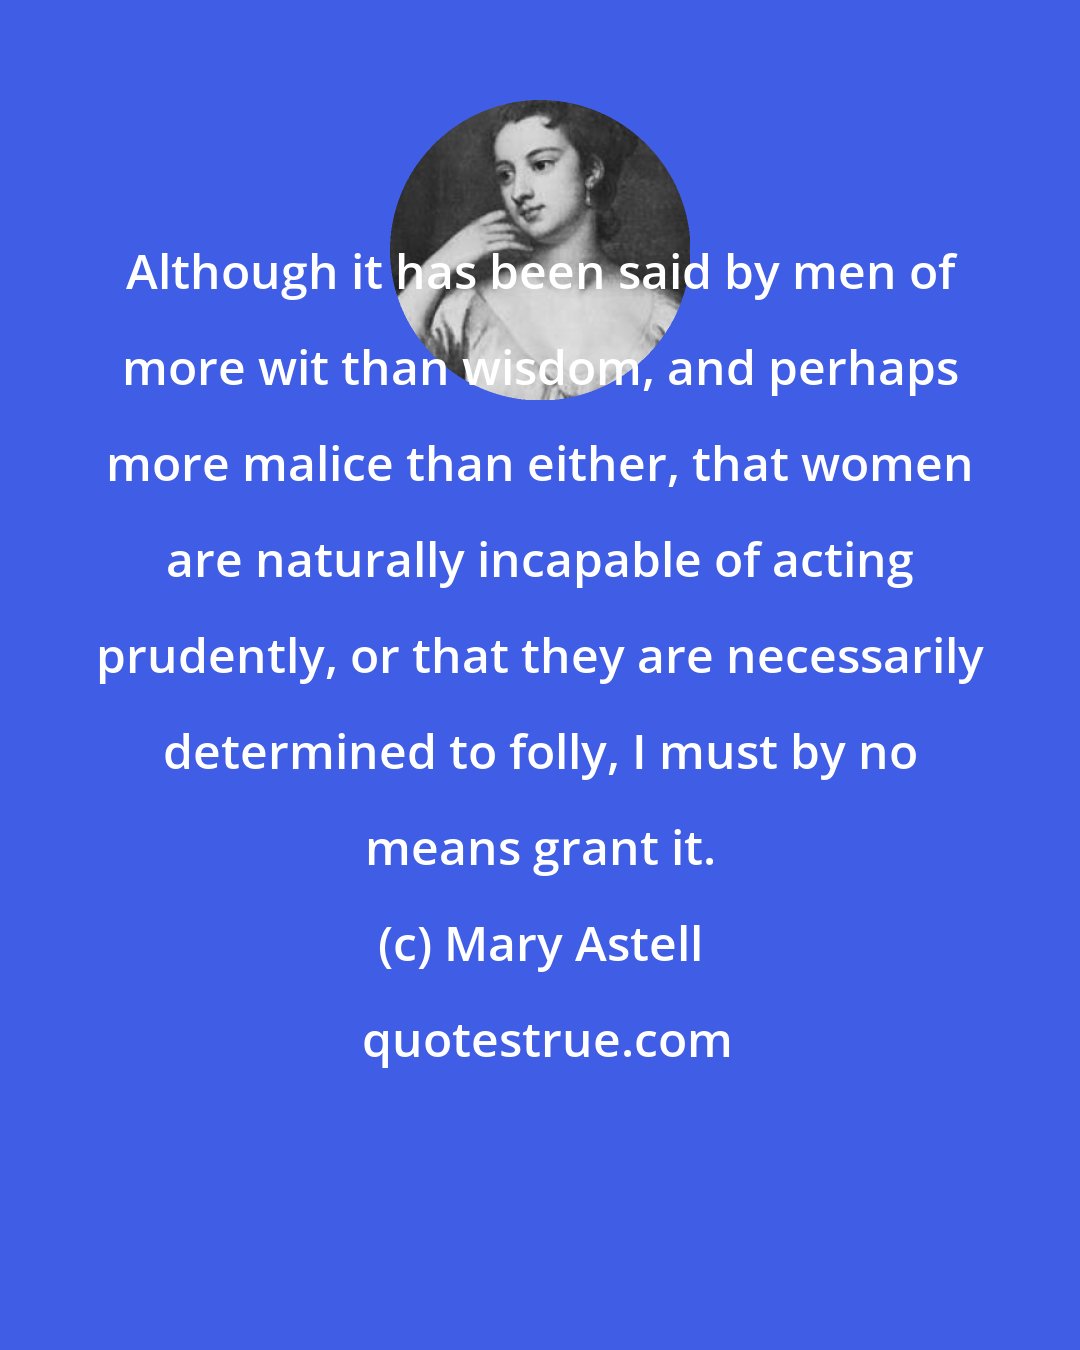 Mary Astell: Although it has been said by men of more wit than wisdom, and perhaps more malice than either, that women are naturally incapable of acting prudently, or that they are necessarily determined to folly, I must by no means grant it.